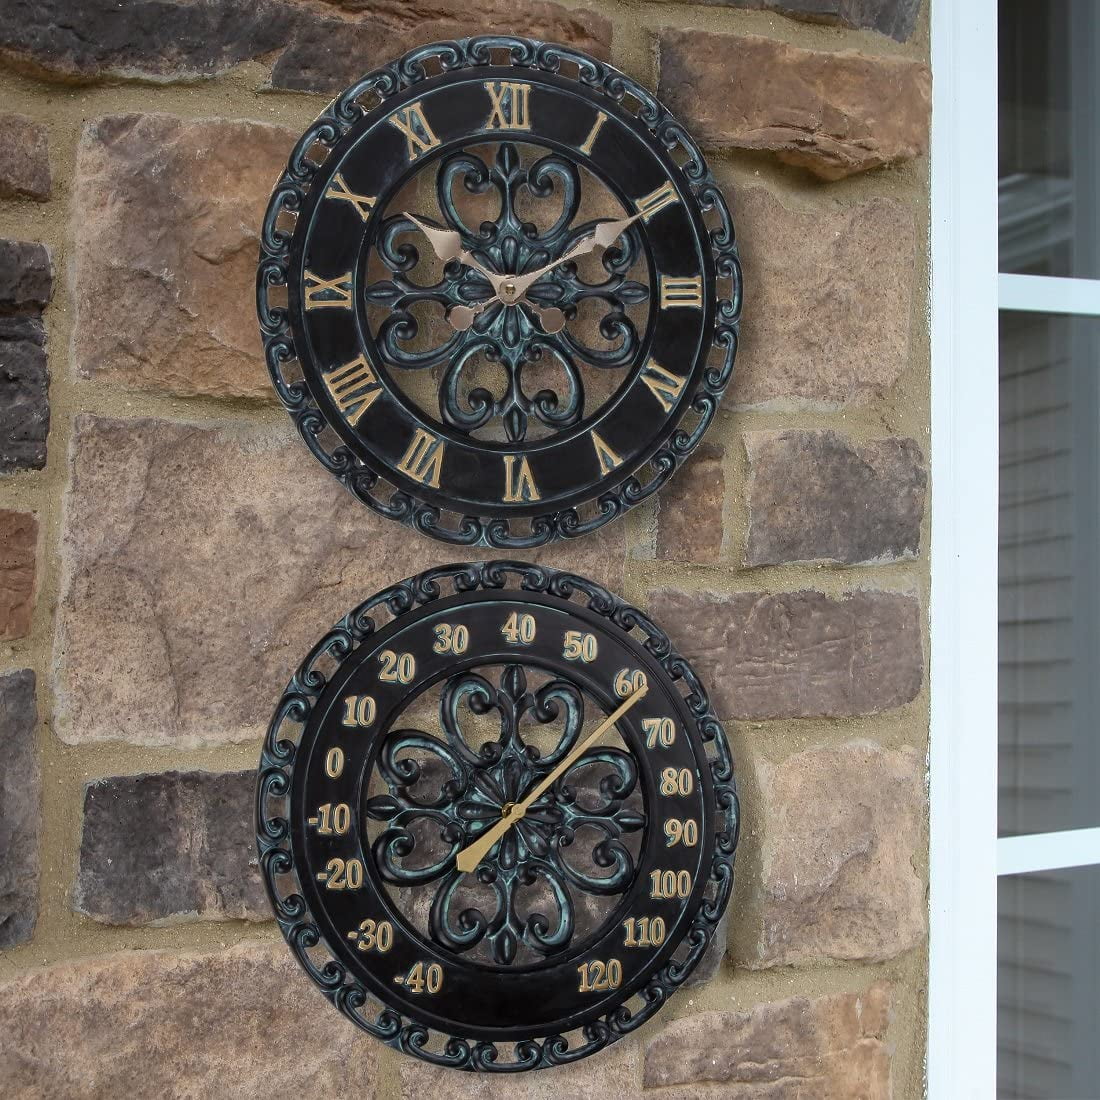 13-inch Outdoor Clock with Thermometer and Humidity